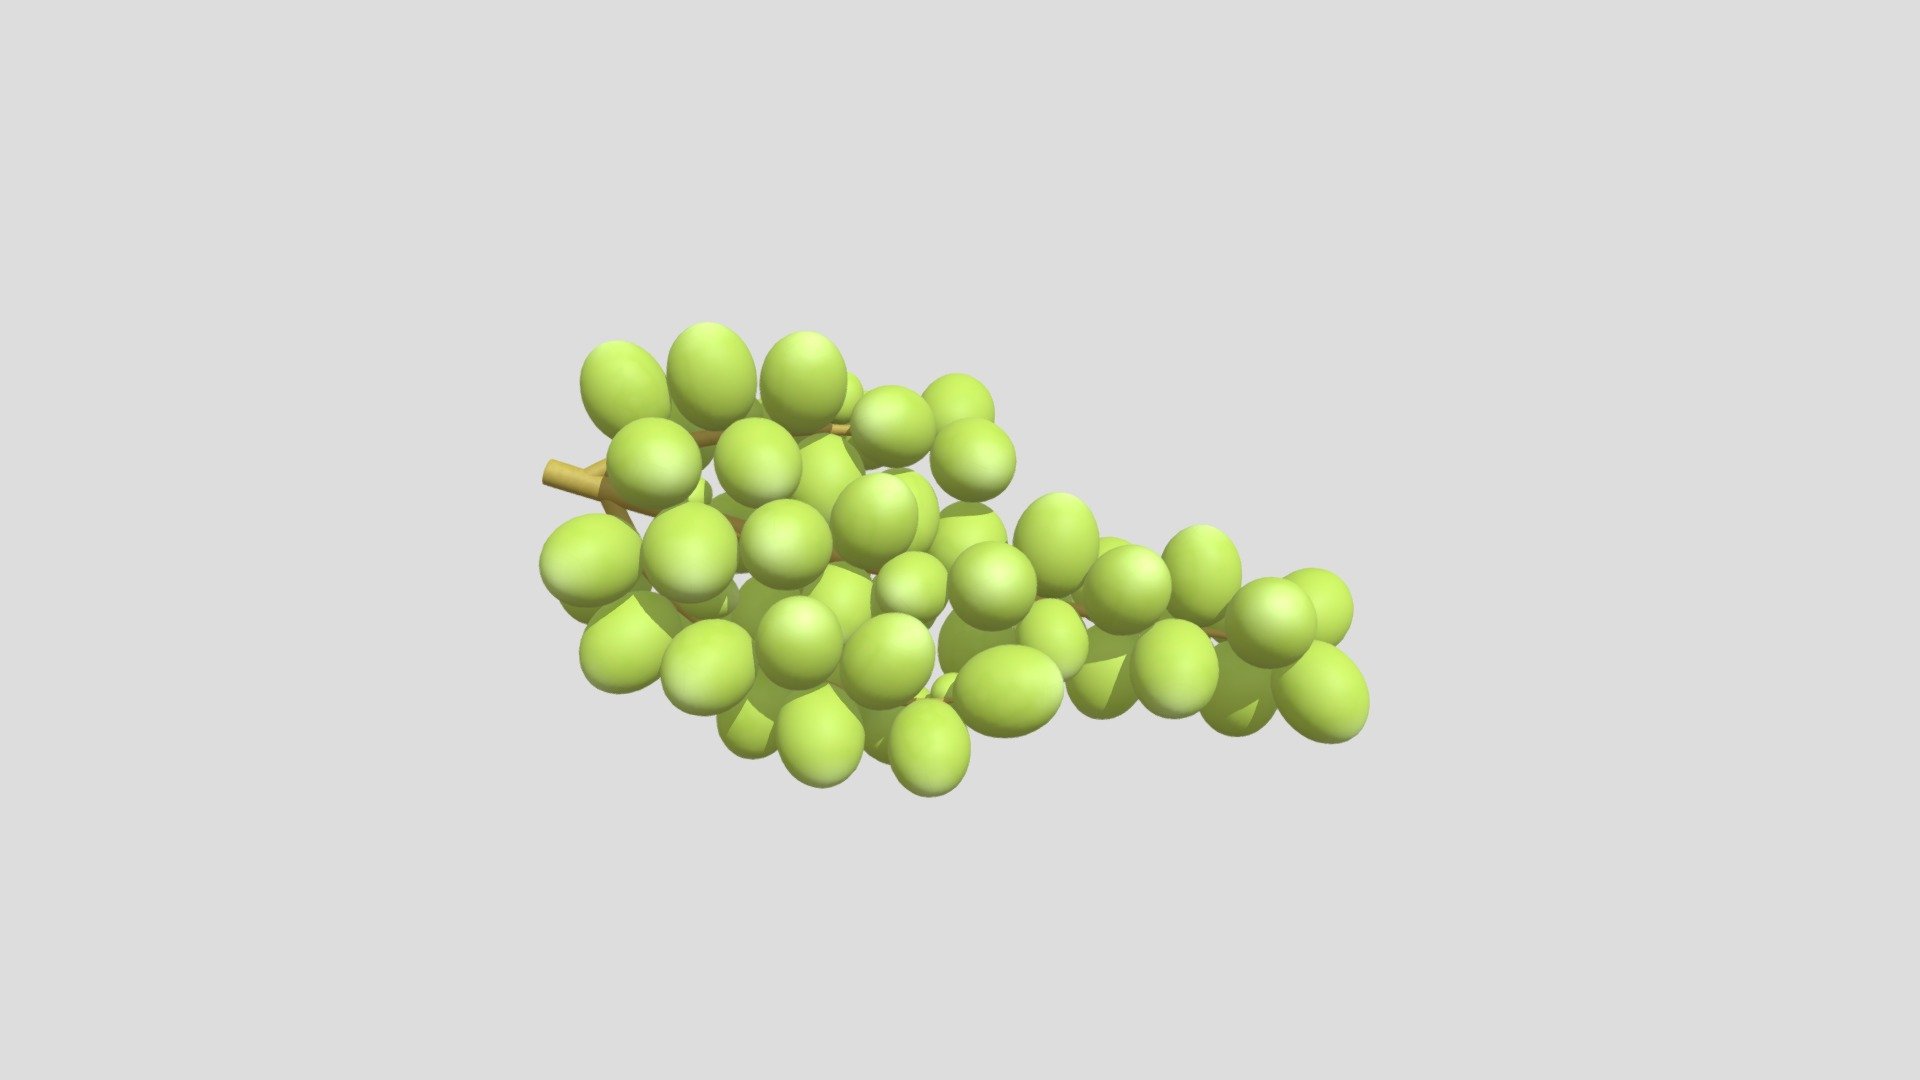 Textures: 1024 × 1024, Colors on texture: Green and brown colors.

Materials: 2 - Grapes, Branch

Smooth shaded.

Non-Mirrored.

Subdivision Level: 1

Origin located on branch-center.

Polygons: 48768

Vertices: 24532

Formats: Fbx, Obj, Stl, Dae.

I hope you enjoy the model! - Grapes - Buy Royalty Free 3D model by Ed+ (@EDplus) 3d model